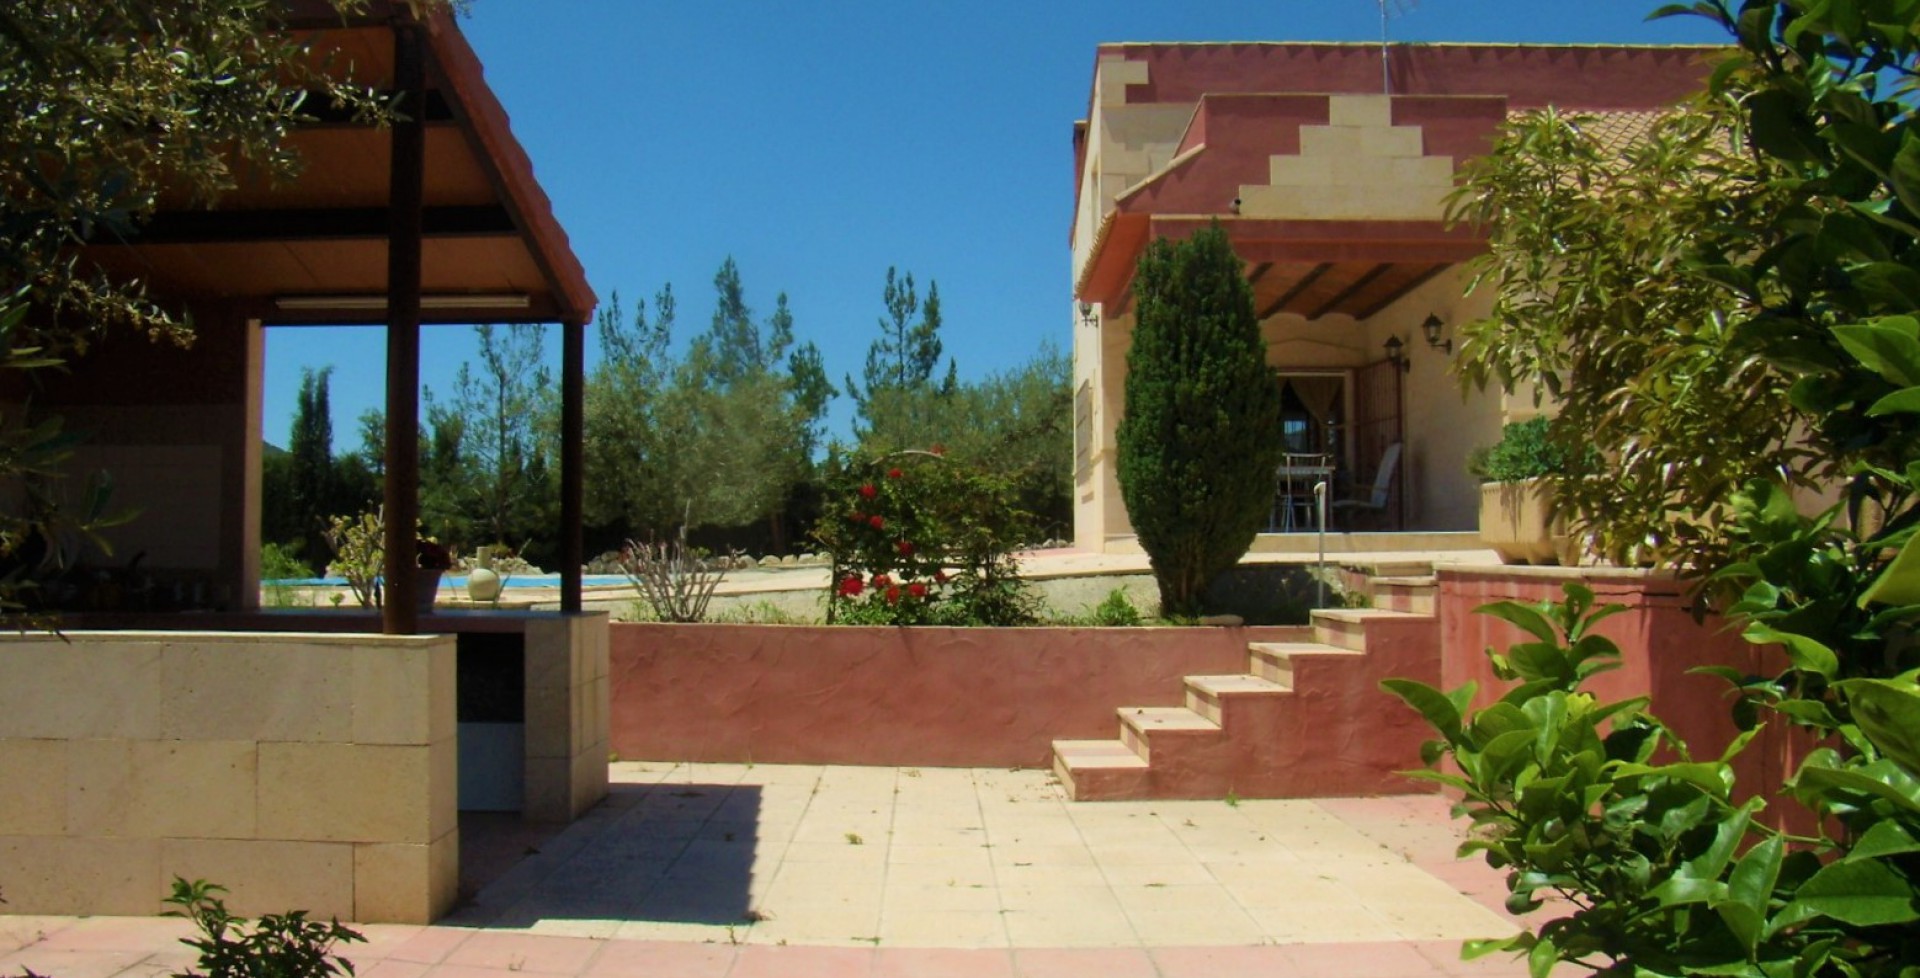 Beautiful detached country home with amazing swimming pool, Ojós, Murcia, Spain